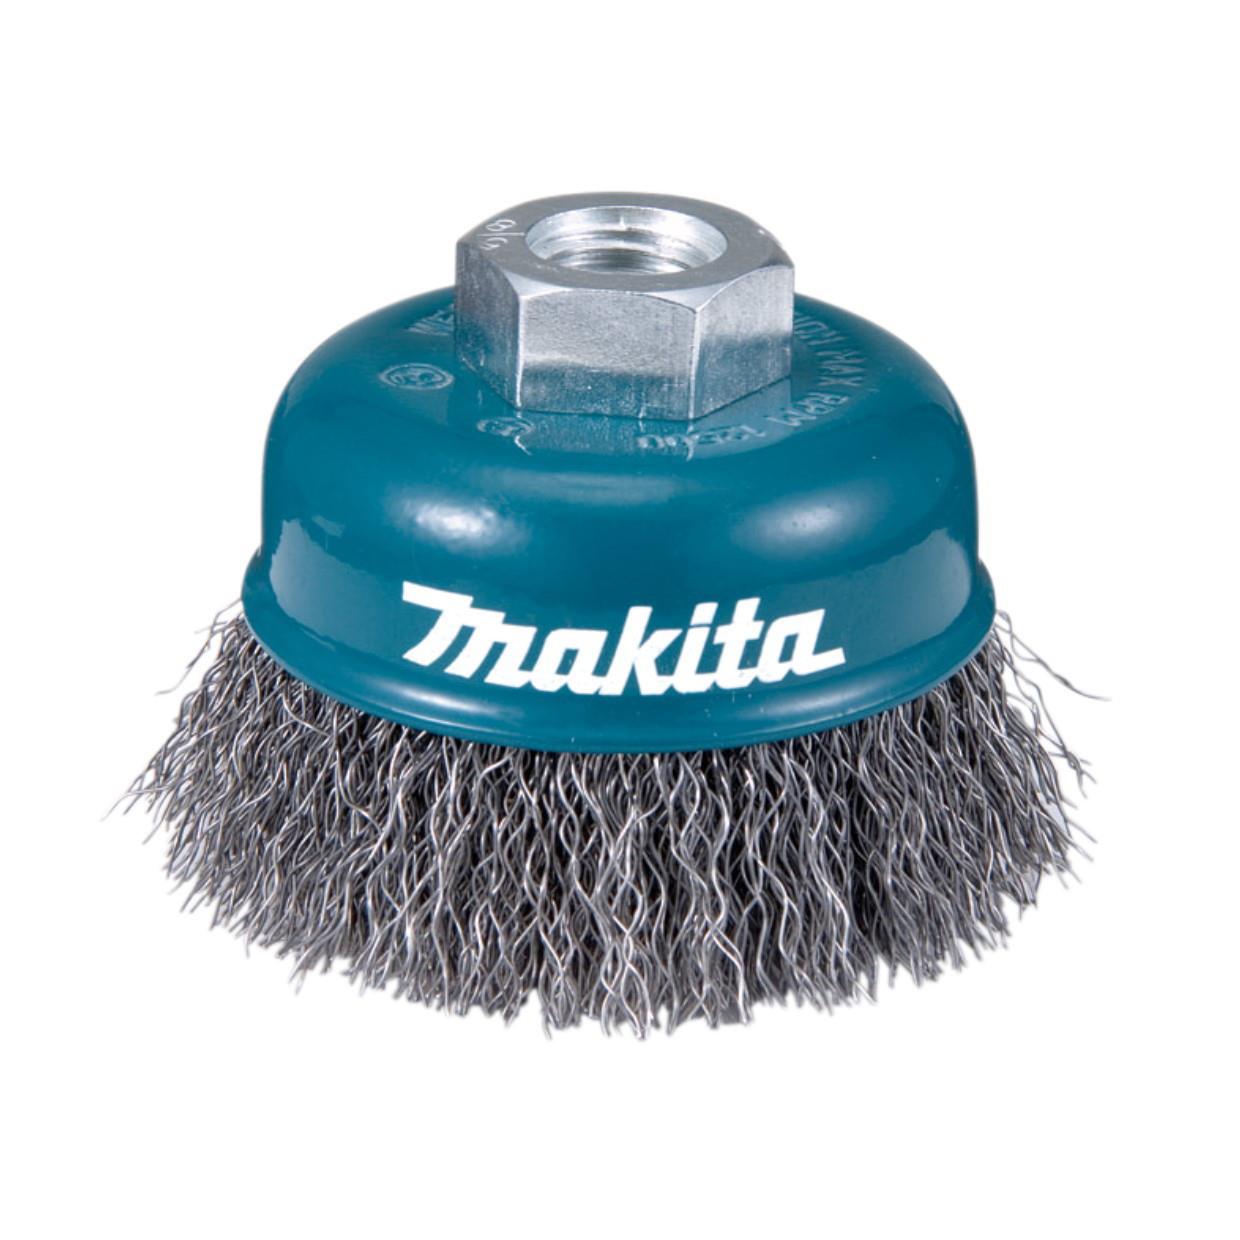 Makita D-24088 Crimp Wire Cup Brush; For Angle Grinder; 75mm Diameter; M10 x 1.5 Spindle Thread